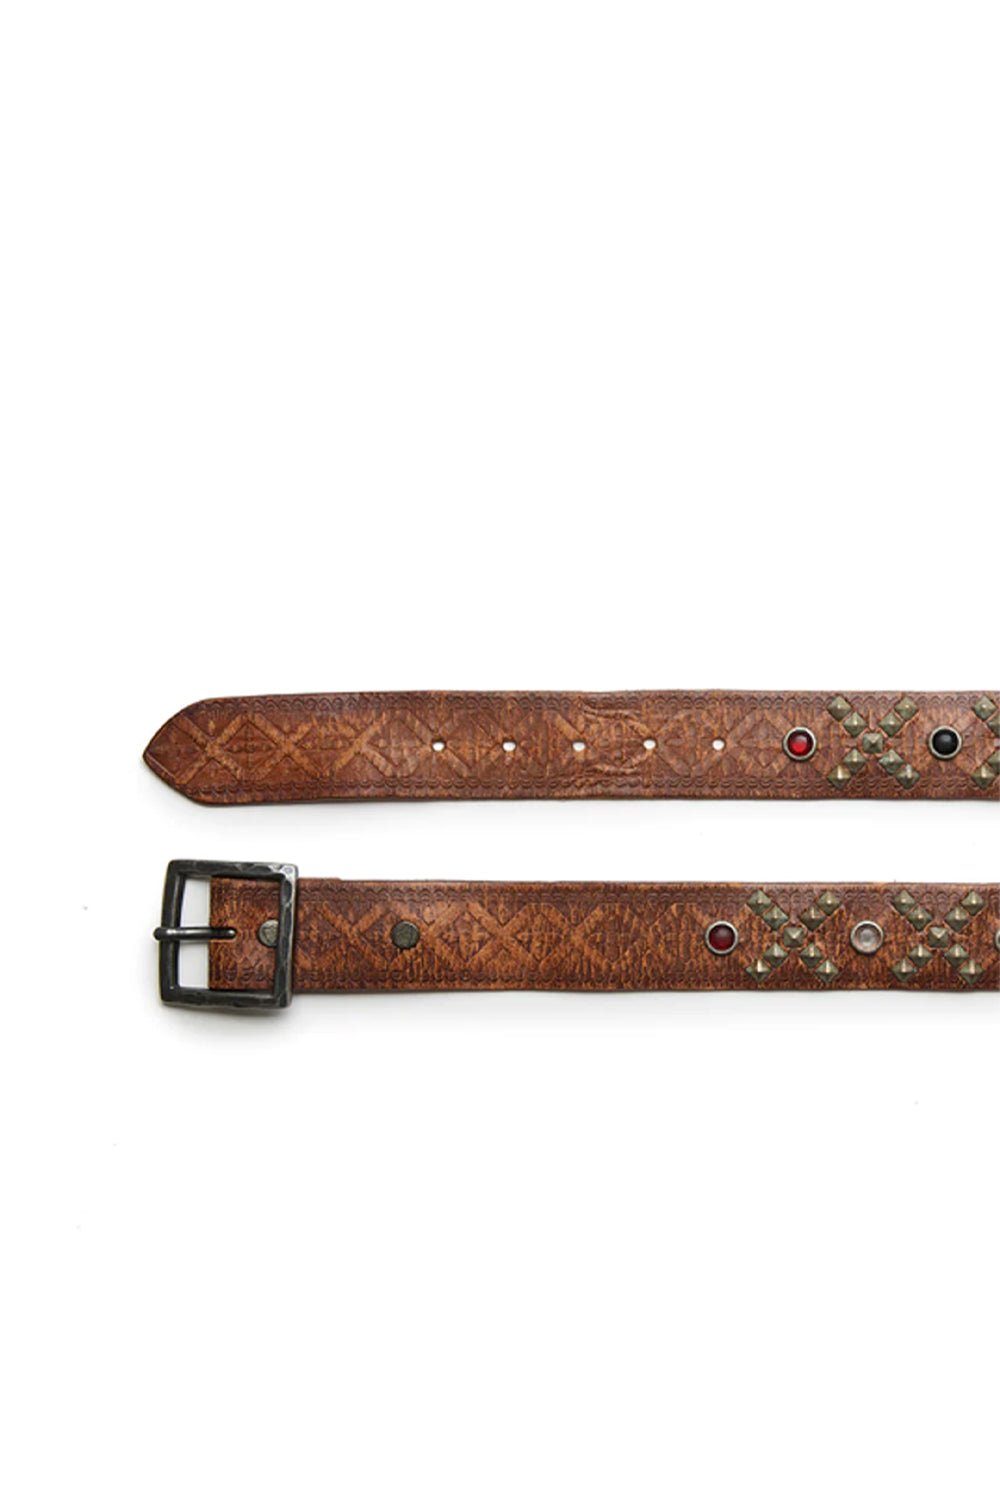 WHISKY BELT Cognac leather belt with studs and rhinestones. Brass buckle. Height: 4 cm. HTC LOS ANGELES